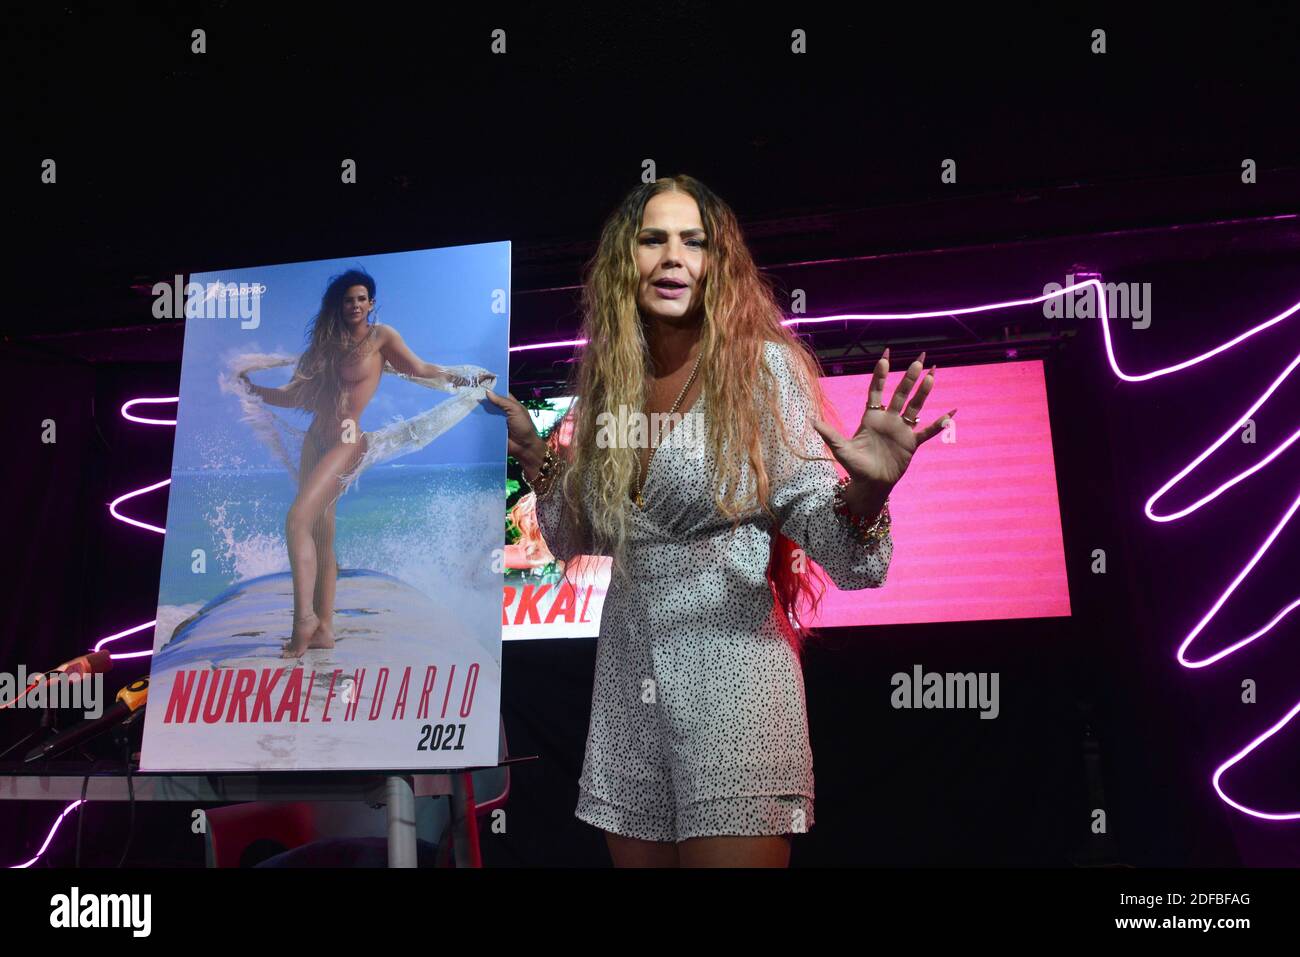 Mexico City, Mexico. 03rd Dec, 2020. MEXICO CITY, MEXICO - DECEMBER 3: Actress Niurka Marcos poses for photos during a press conference to launch her calendar ‘Niurkalendar' at Rico Club on December 3, 2020 in Mexico City, Mexico. Credit: Carlos Tischler/Eyepix Group/The Photo Access Credit: The Photo Access/Alamy Live News Stock Photo